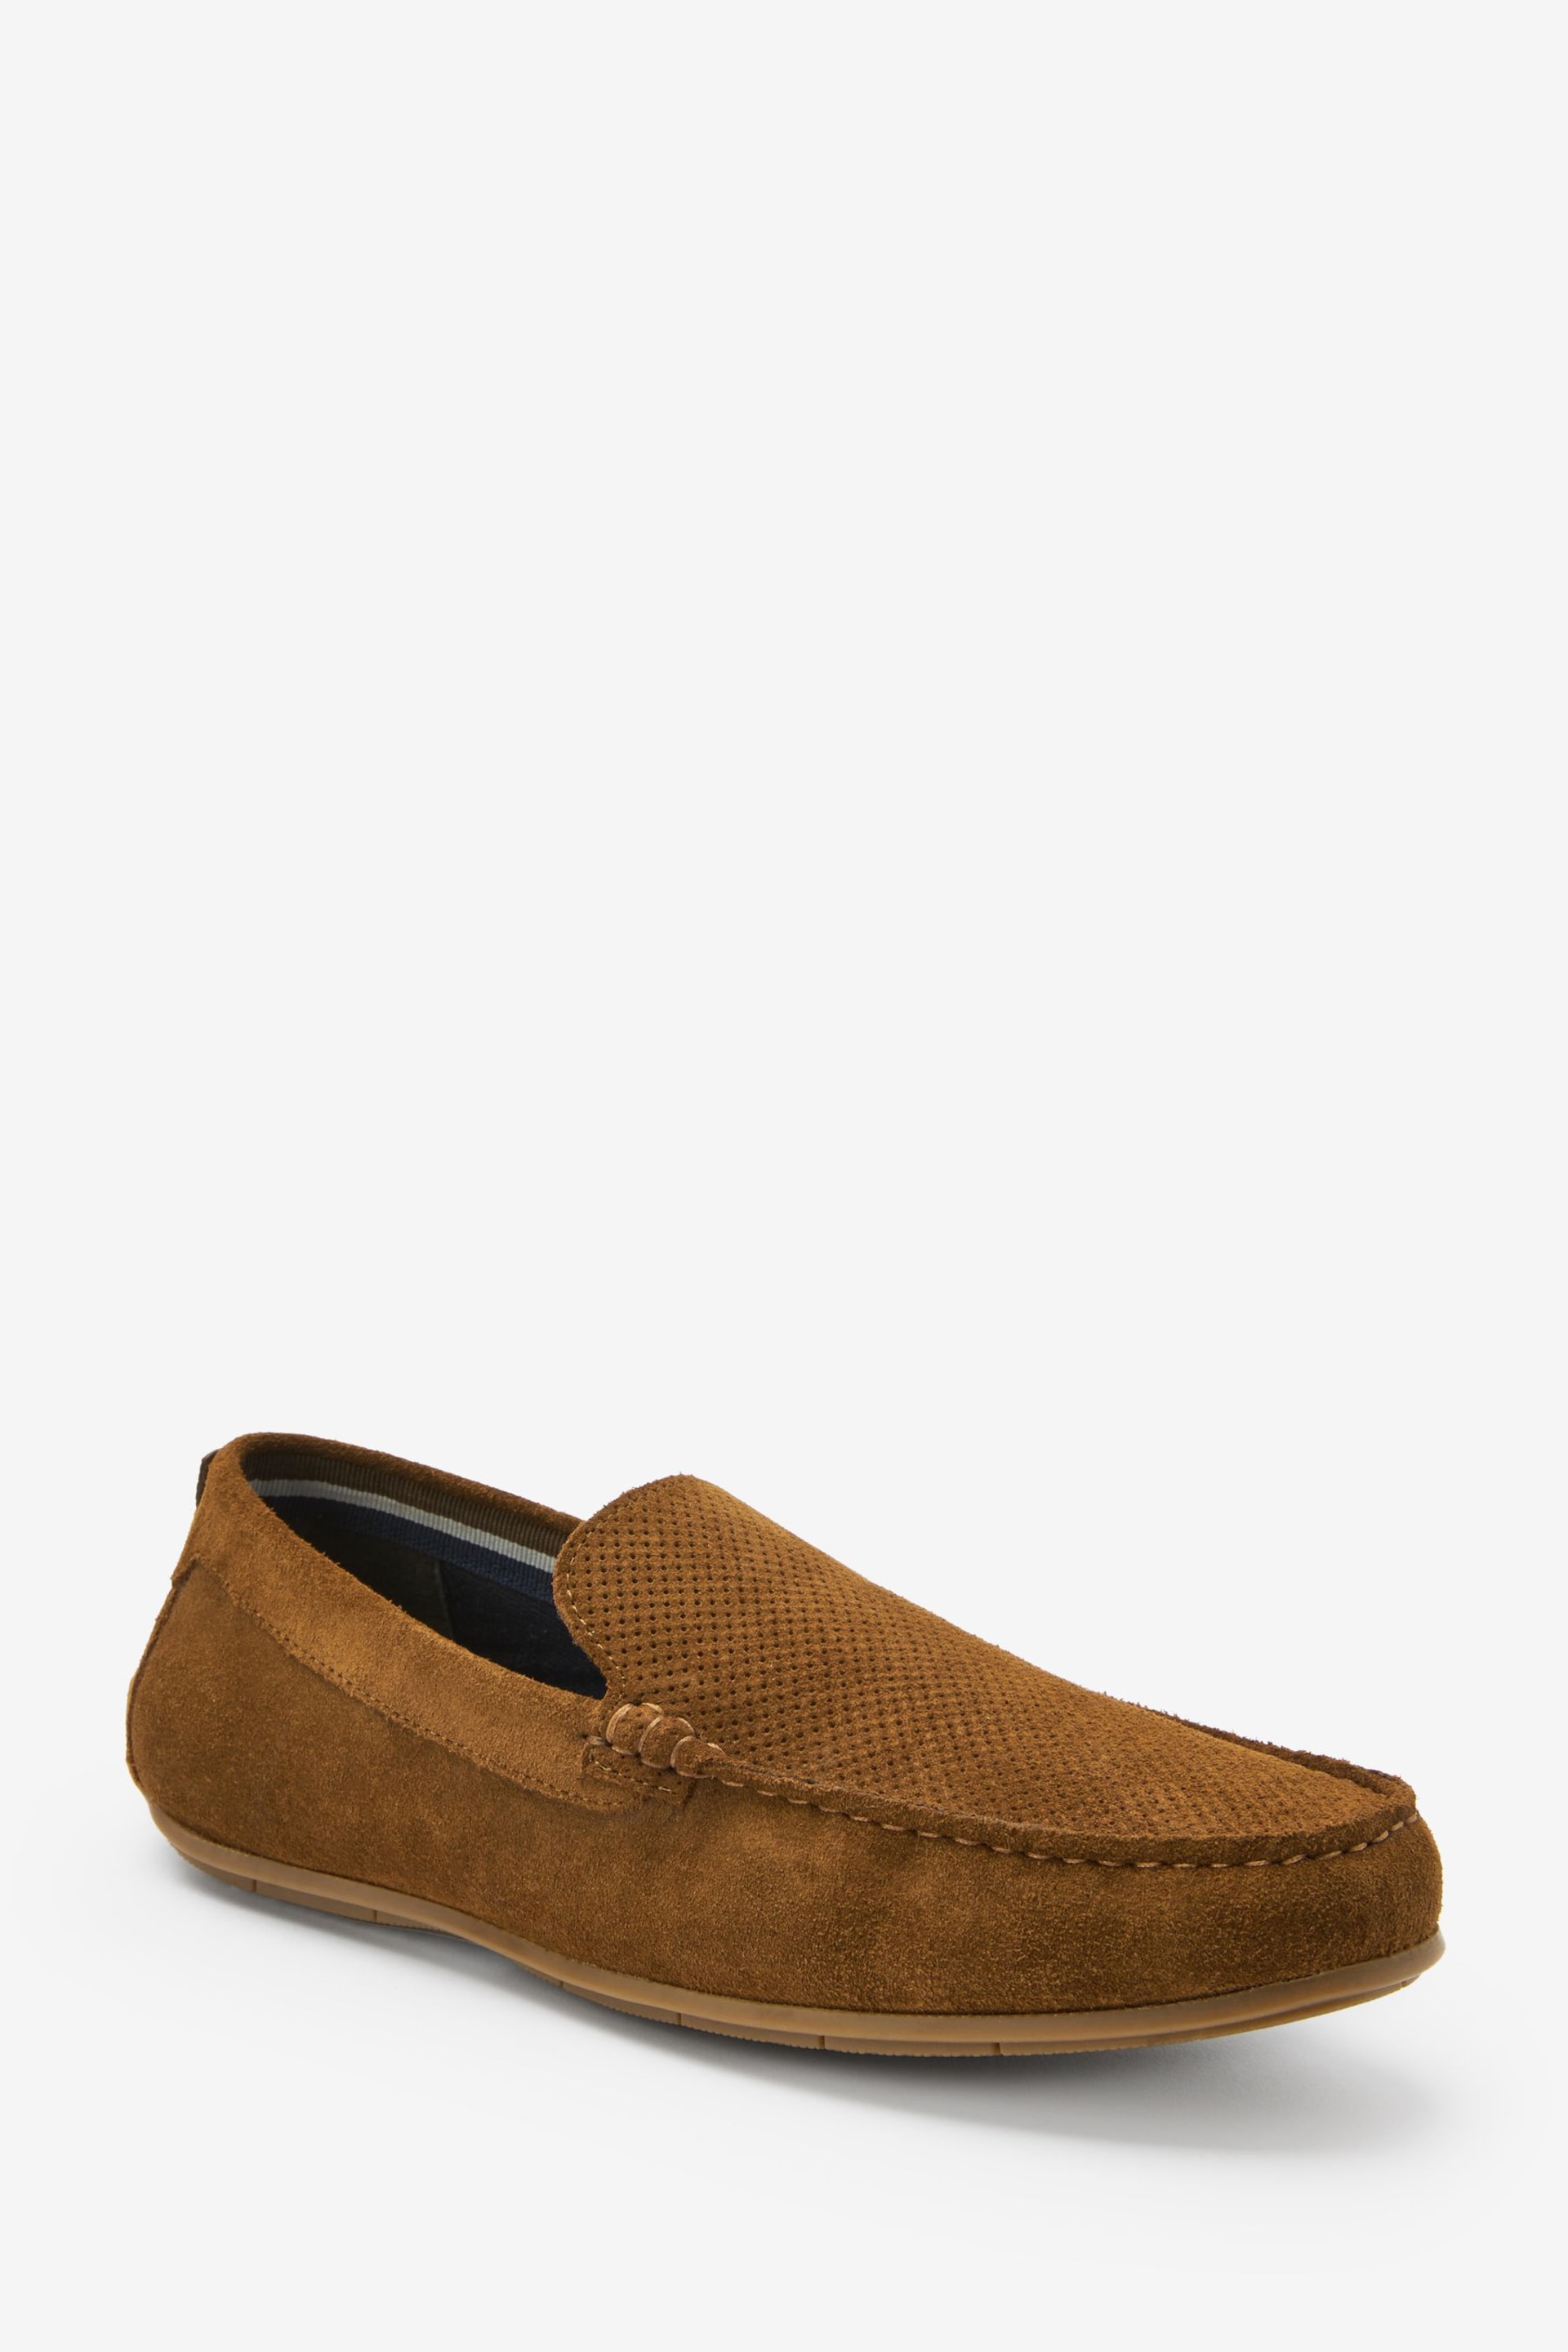 Tan Brown Suede Driver Shoes - Image 3 of 5